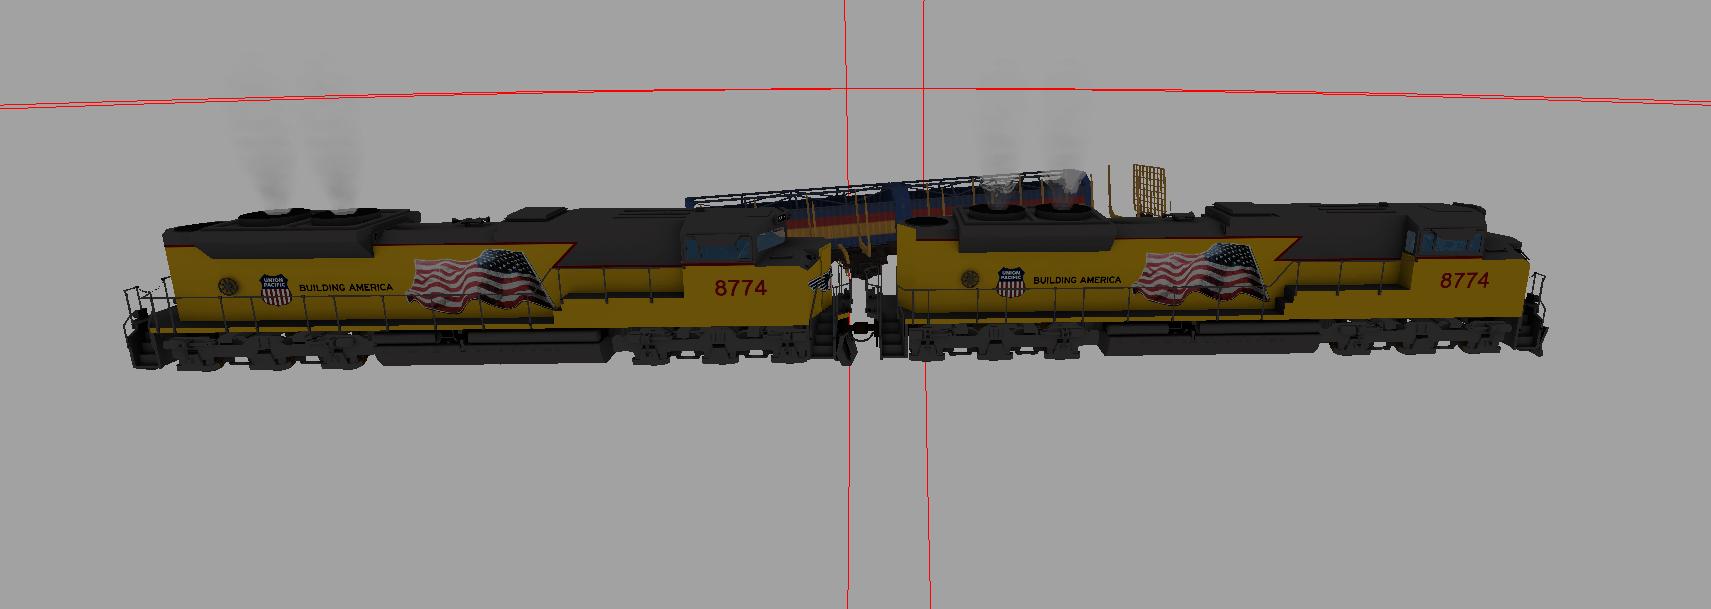 union-pacific-v1-1_1.png